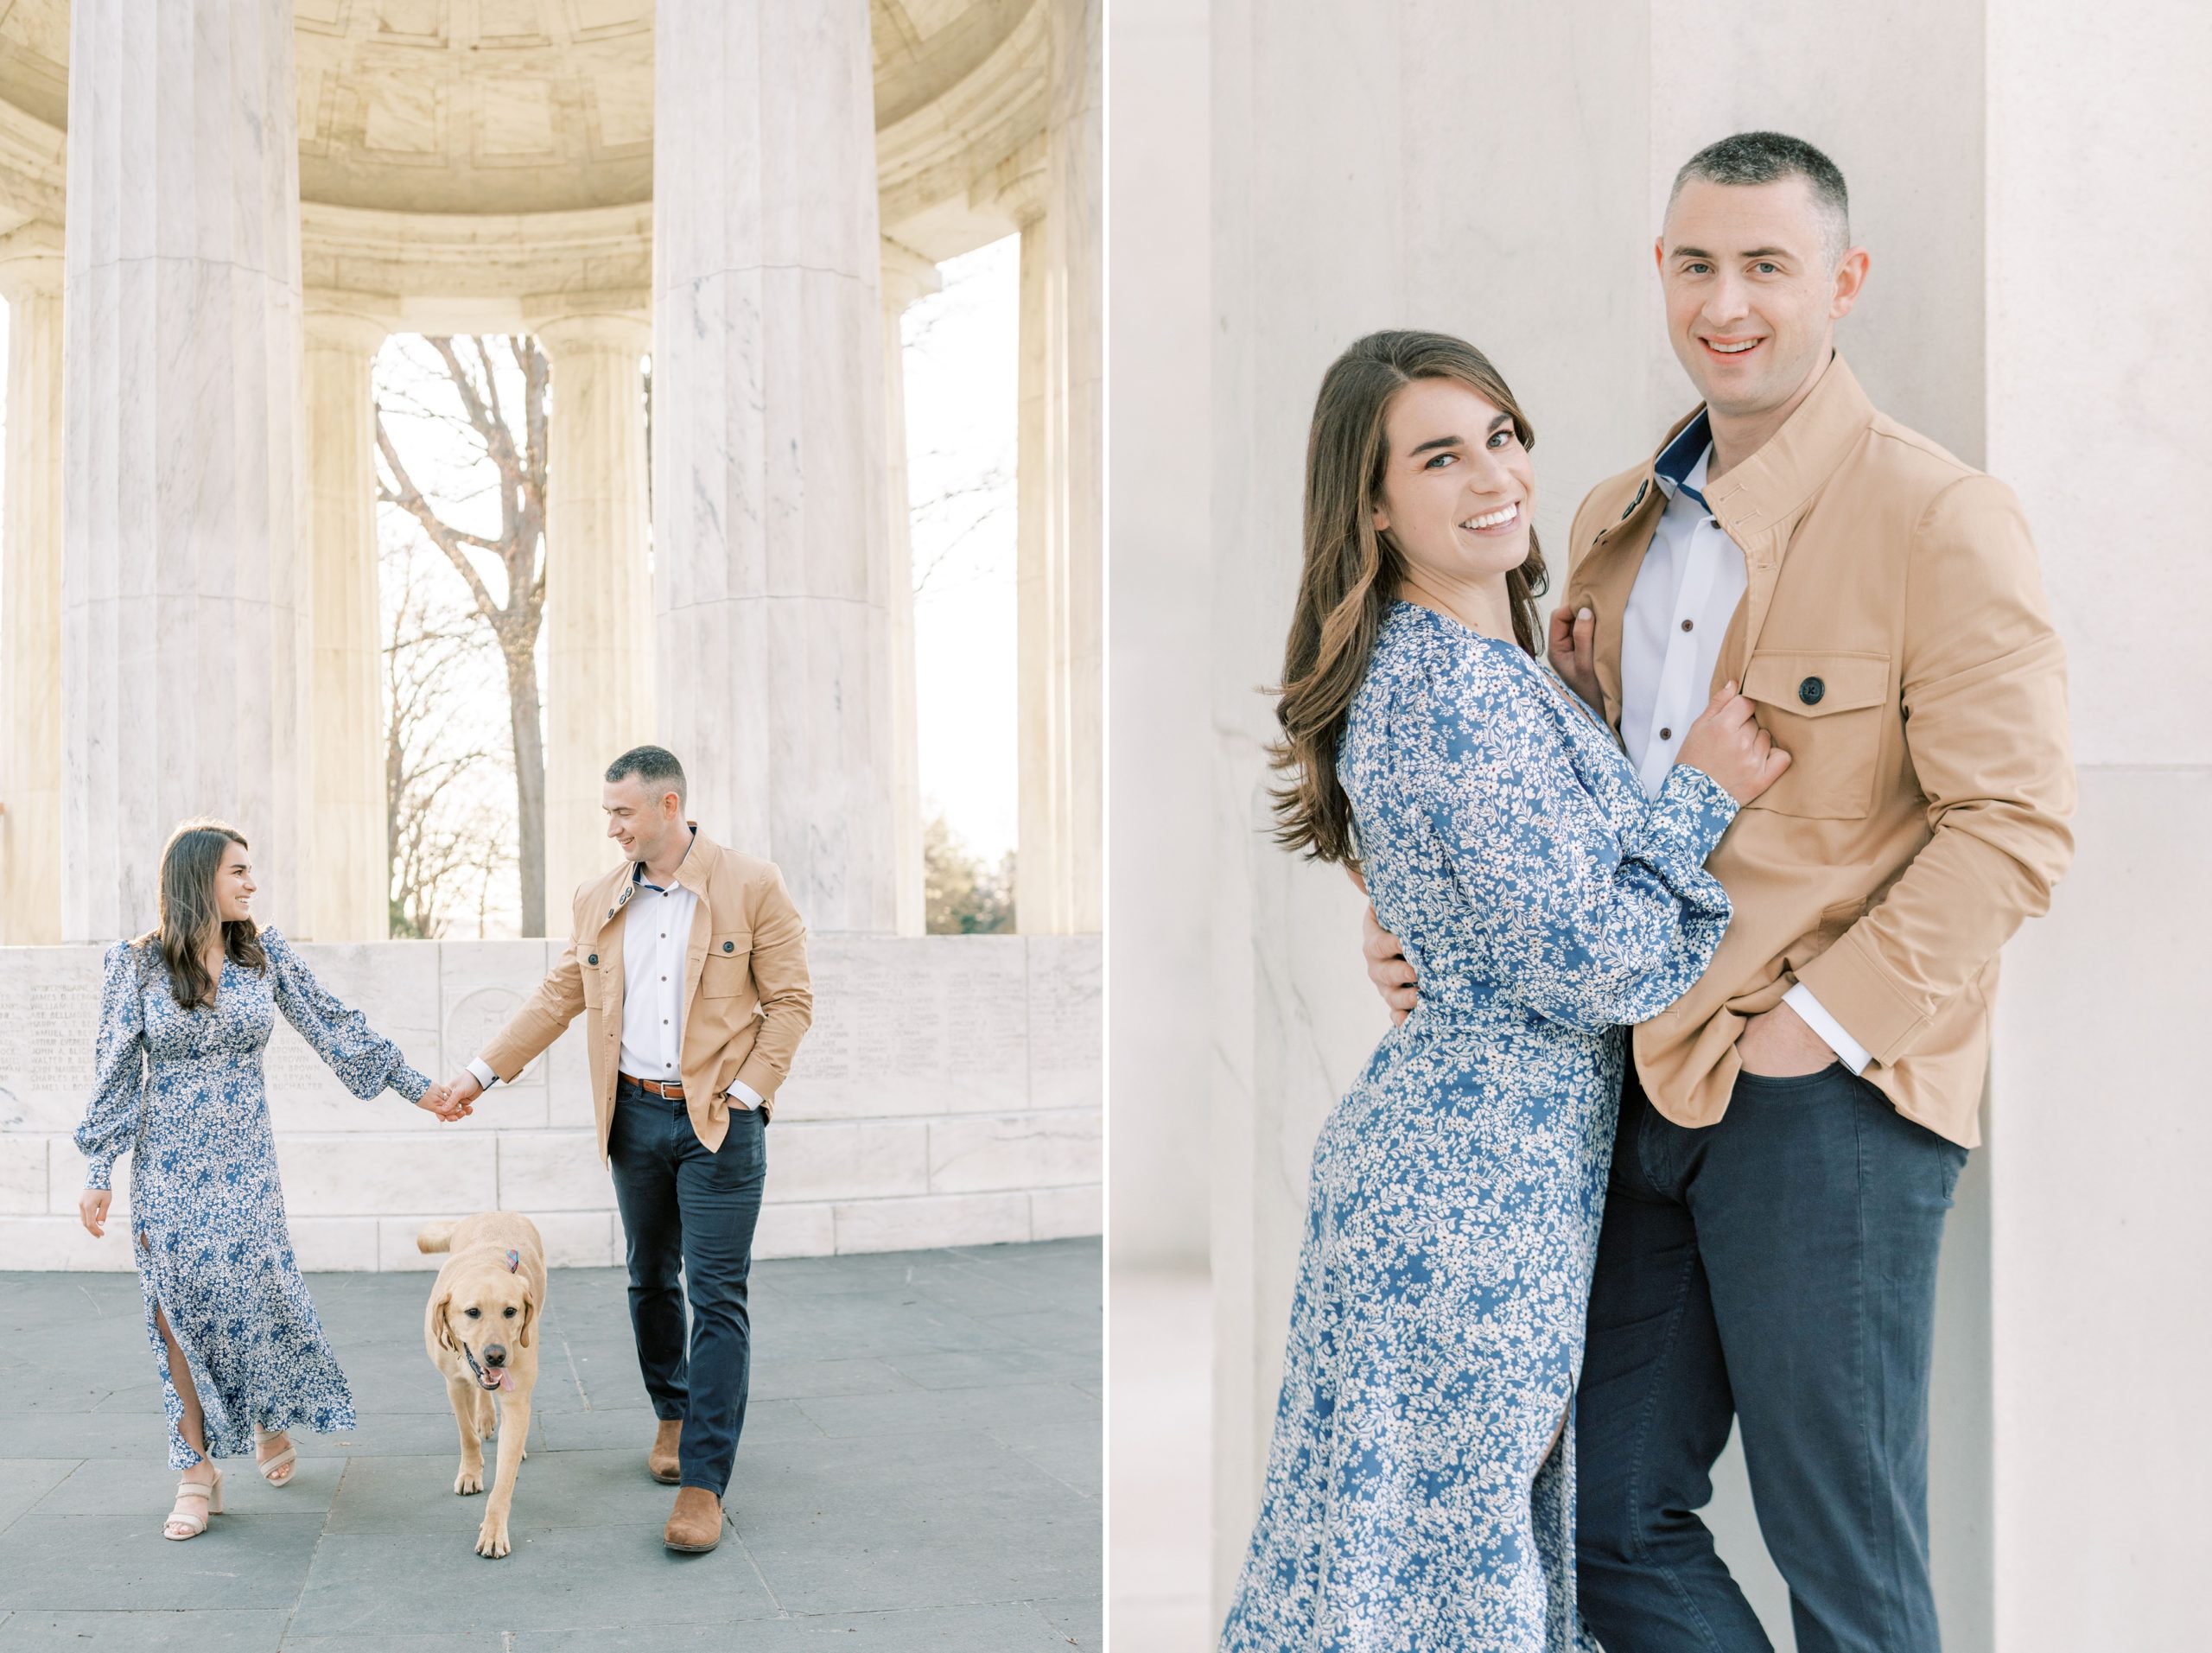 An iconic cherry blossom engagement session at the Tidal Basin of the Jefferson Memorial in Washington, DC during peak bloom!